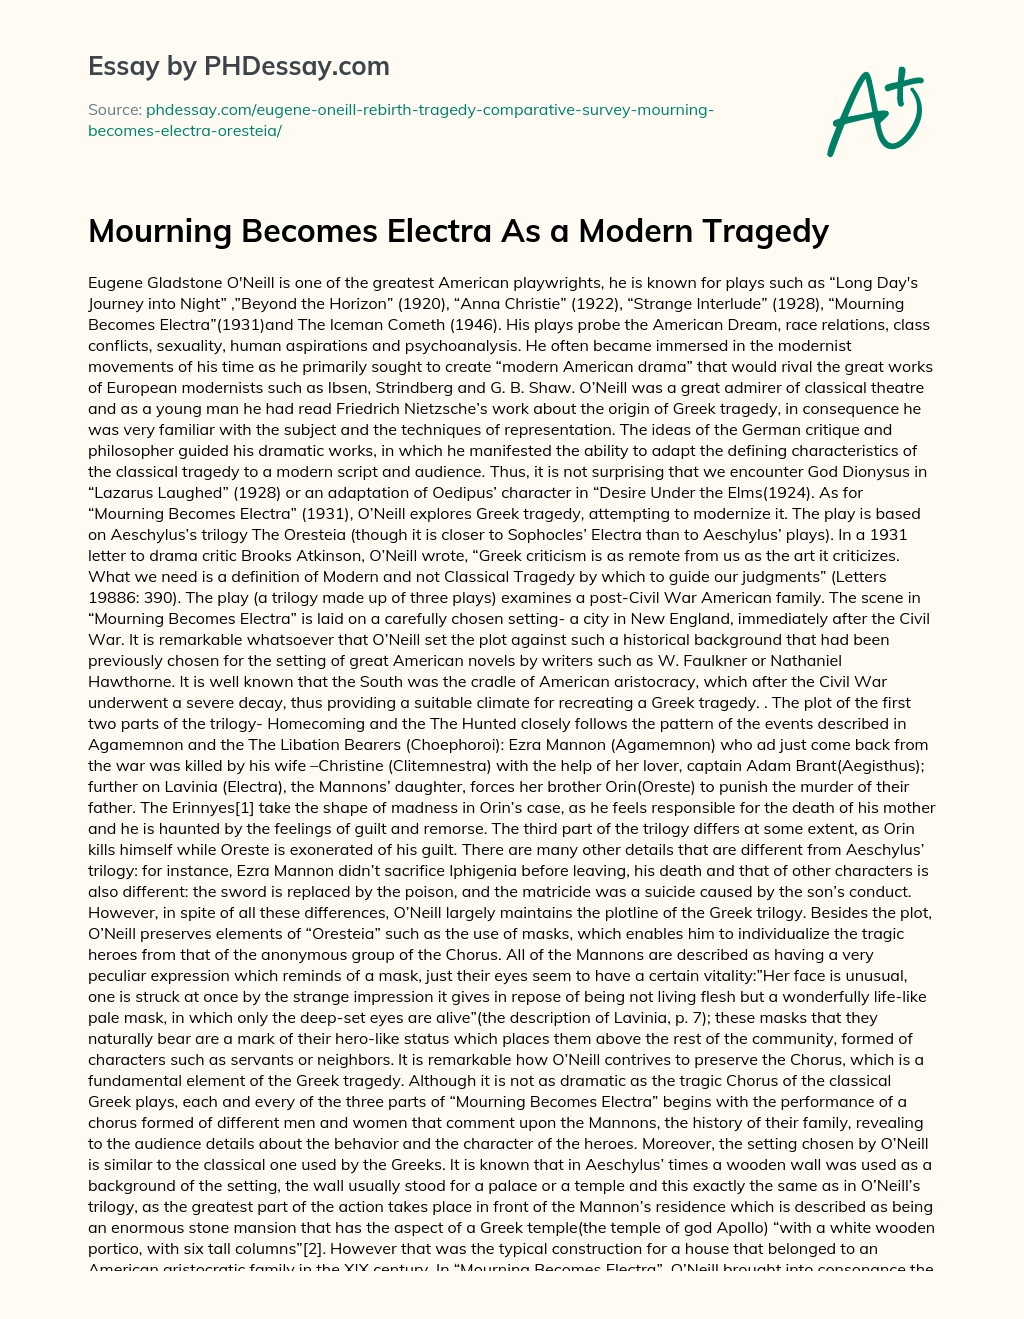 Mourning Becomes Electra As a Modern Tragedy essay